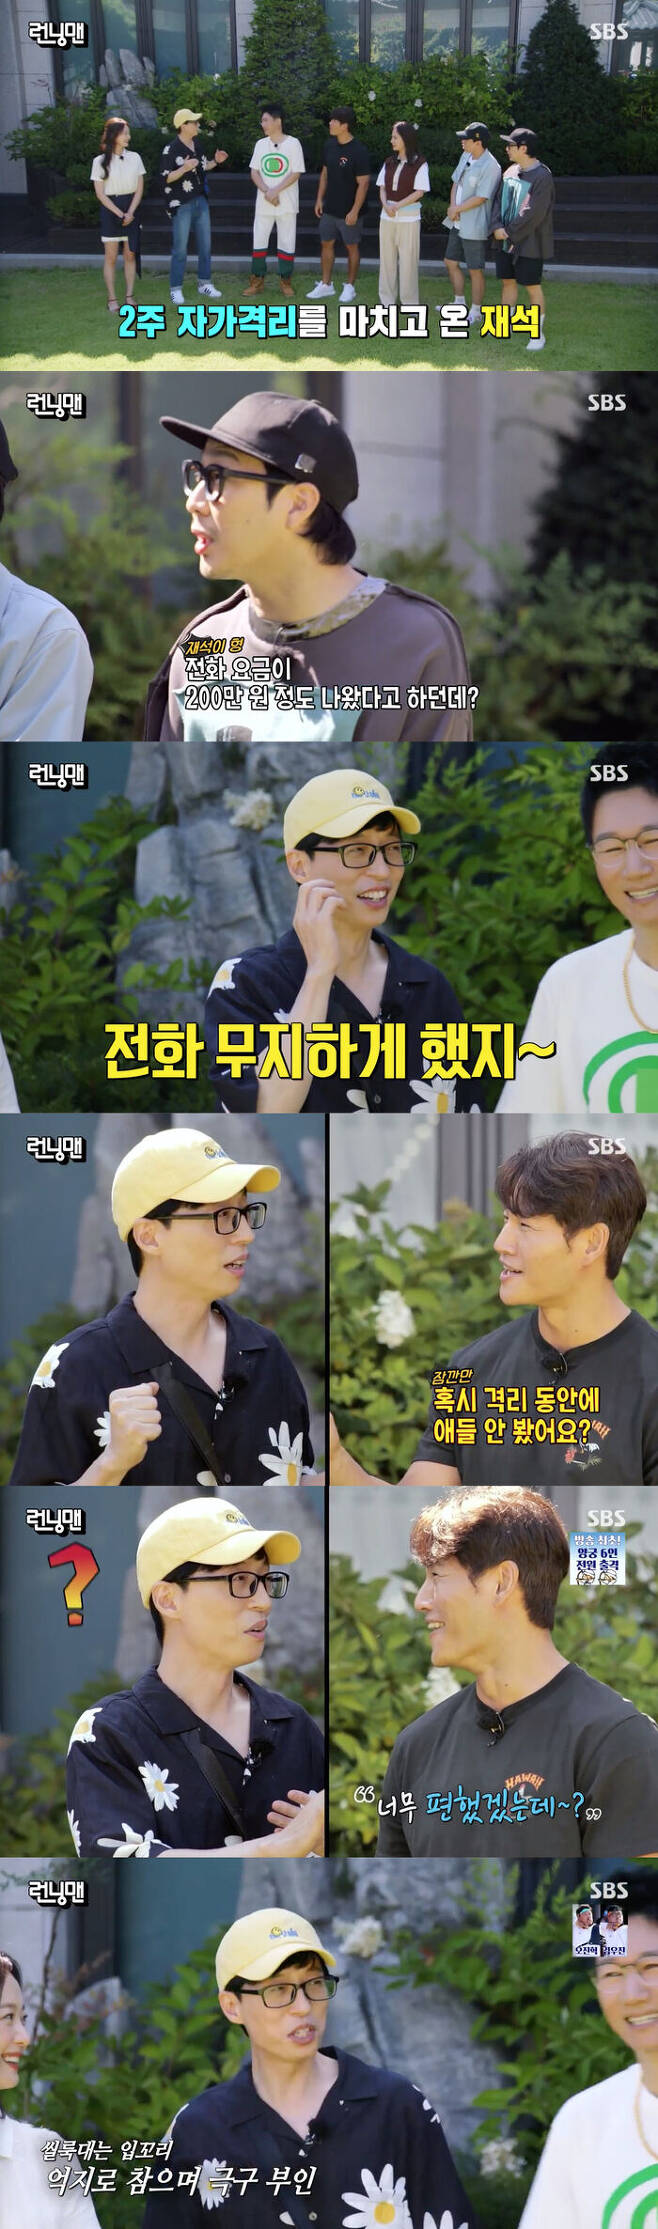 Yoo Jae-Suk finishes Self-QuarantineOn SBS Running Man broadcasted on the 22nd, Yoo Jae-Suk returned after two weeks of self-isolation and attracted attention.On the day of the broadcast, Yoo Jae-Suk announced that he had come after self-isolation, so Haha said, The phone charge was about 2 million One.He said he called me that way. Yoo Jae-Suk then admitted, Yes, it was a lot of calls, and Haha asked, Jeong Jun-ha took a lesson. How much did you call?So, Jeon So-min confessed that he called me and did not hang up.At this time, Kim Jong-kook asked Yoo Jae-Suk, But did you see the children during the isolation period? And laughed at Yoo Jae-Suk, who said he could not meet the children.Ji Suk-jin also said, I can not talk to you openly. Haha said, You could actually come out of One Week.But there was a reason for extending One Week. It is Vacation. 